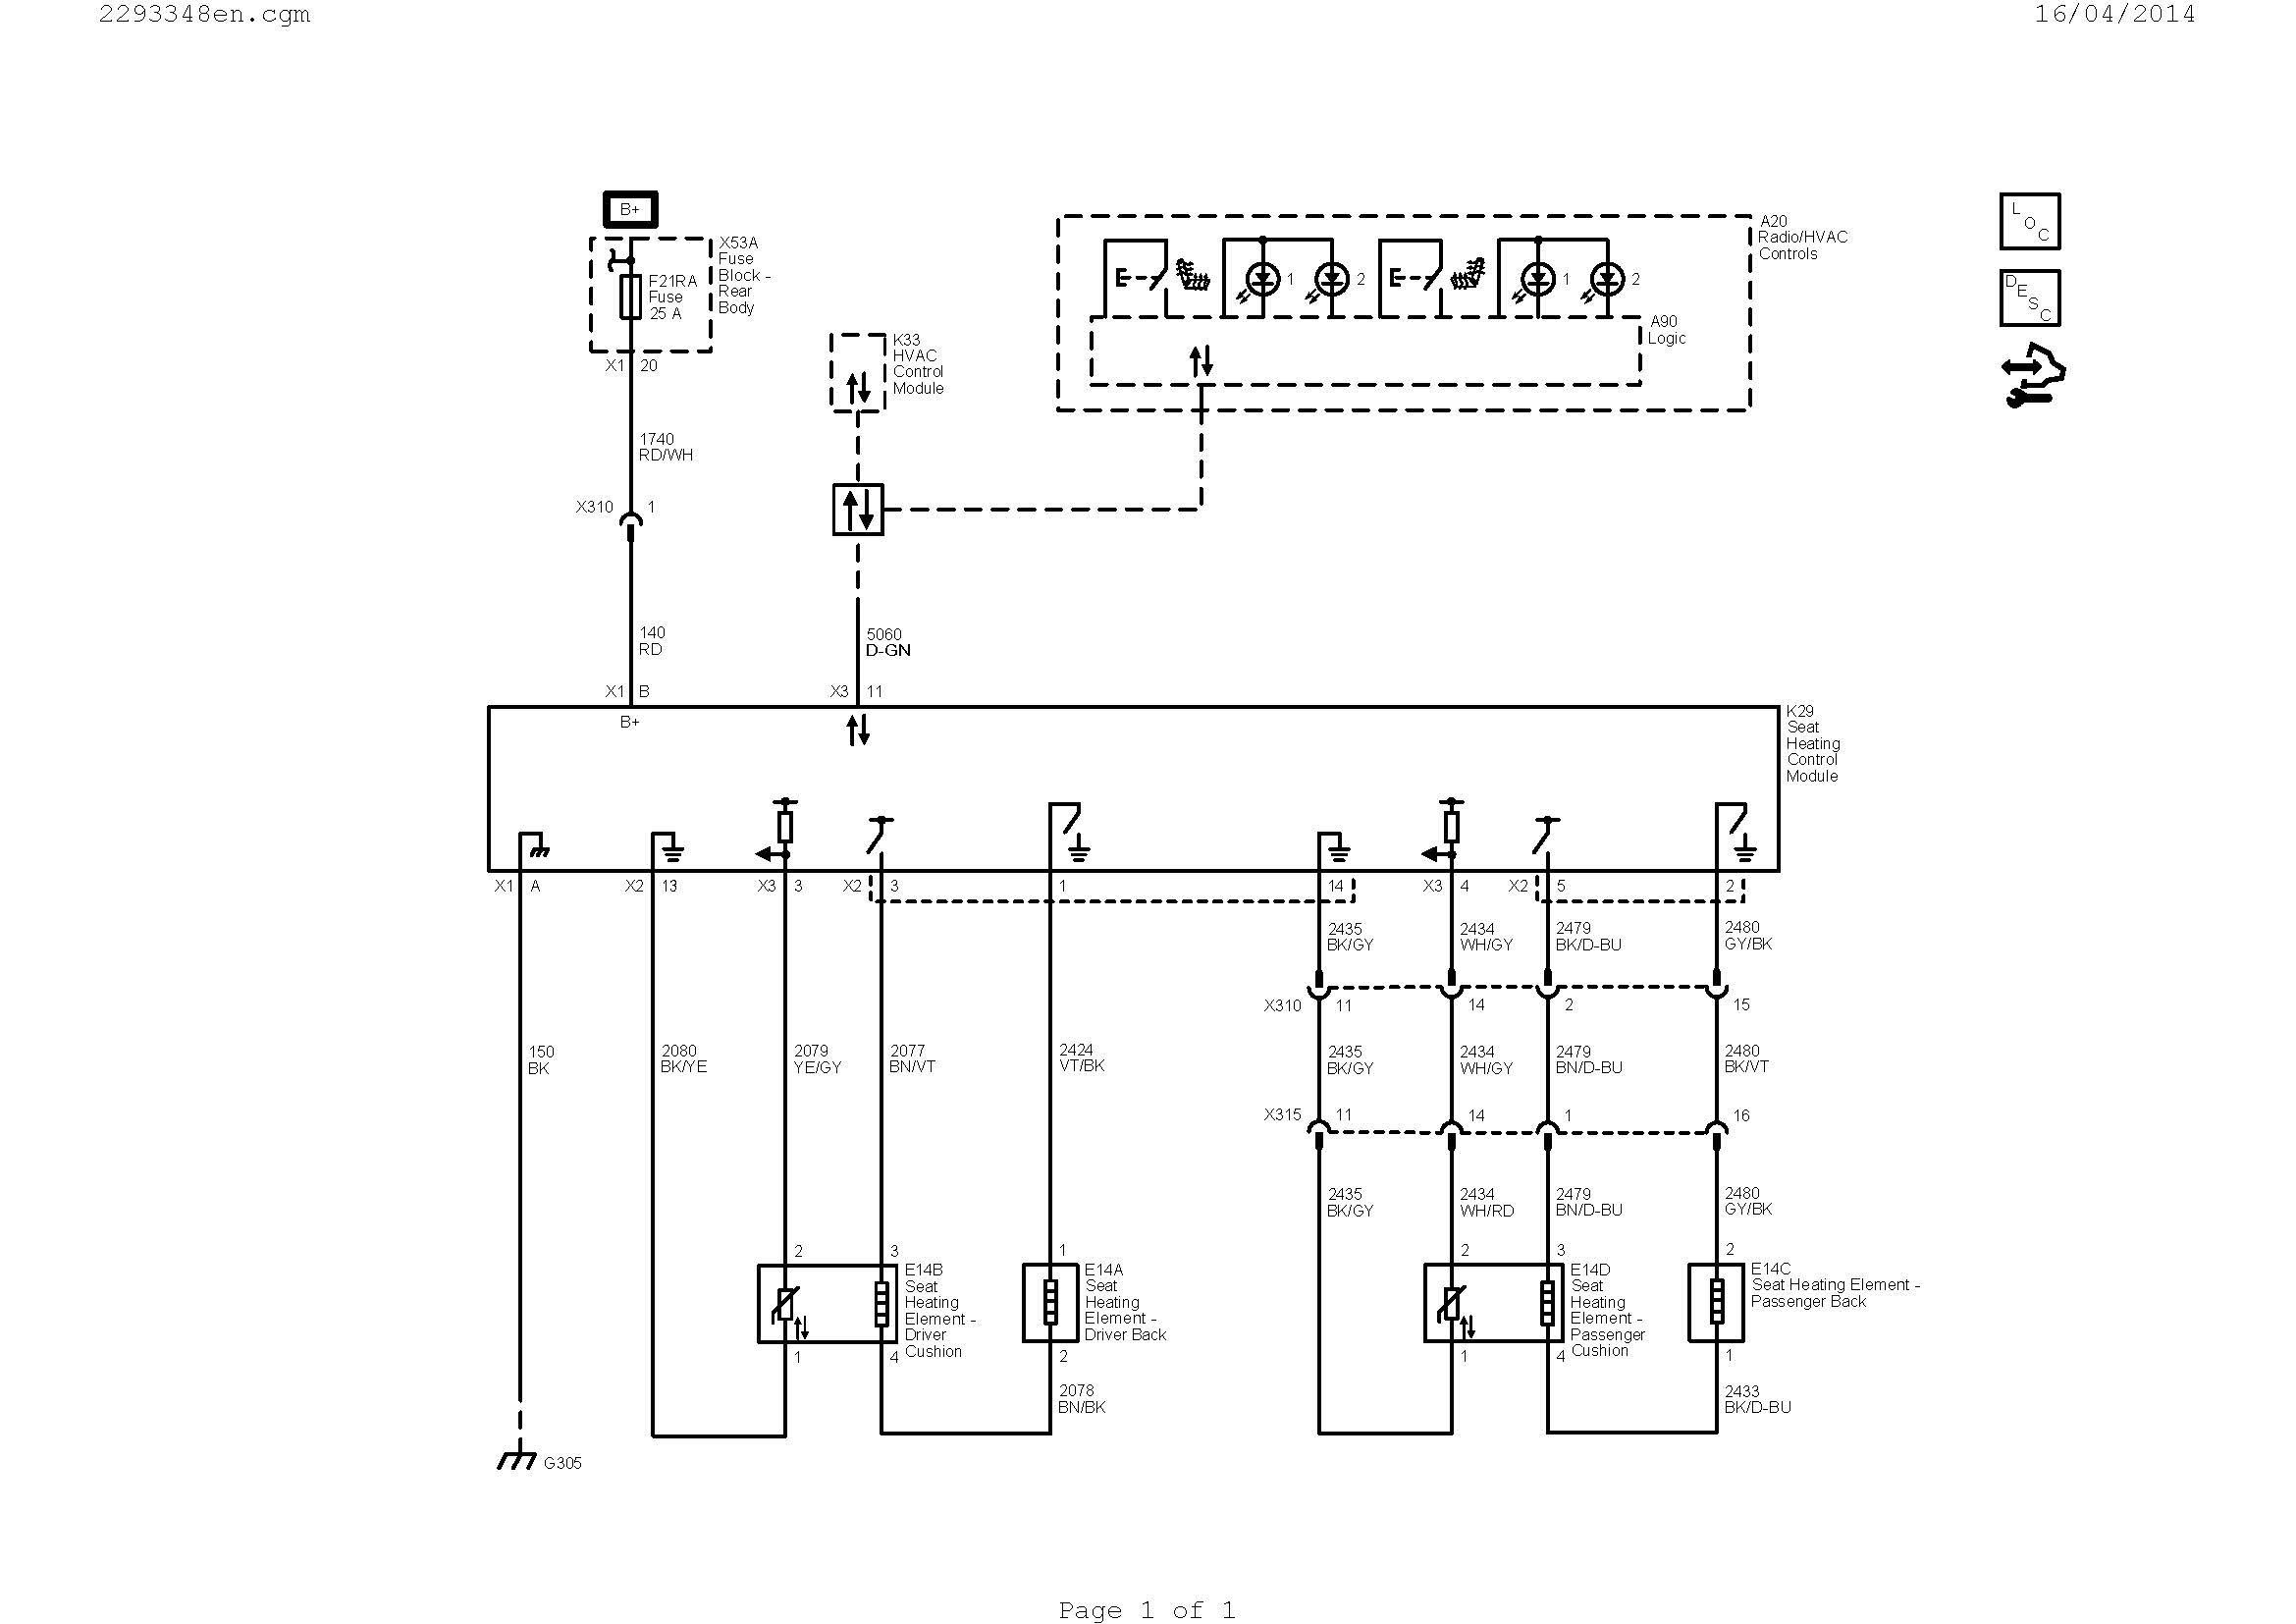 Home thermostat Wiring Diagram Wiring A Ac thermostat Diagram New Wiring Diagram Ac Valid Hvac